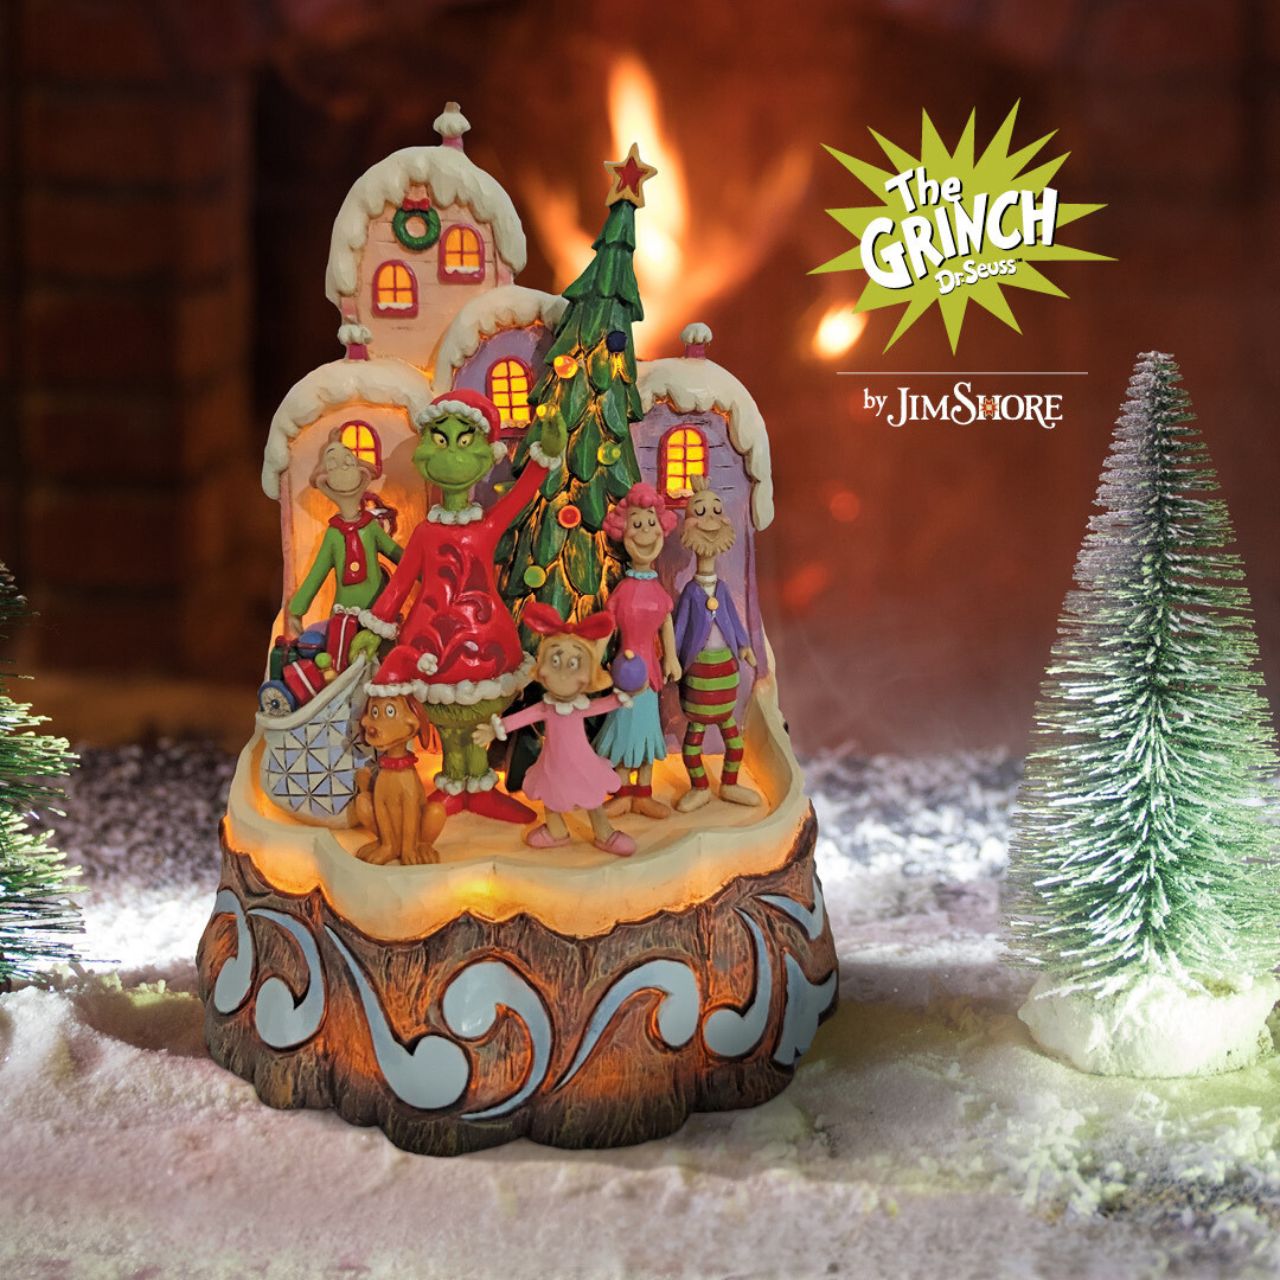 Dr. Seuss Grinch Carved by Heart Figurine  With an honest smile, the Grinch, by Jim Shore, has realized the true meaning of Christmas and for once, feels love in his heart. Together with Max and the residents of Whoville, Grinch waves solemnly with Cindy Lou Who in the decorated town.